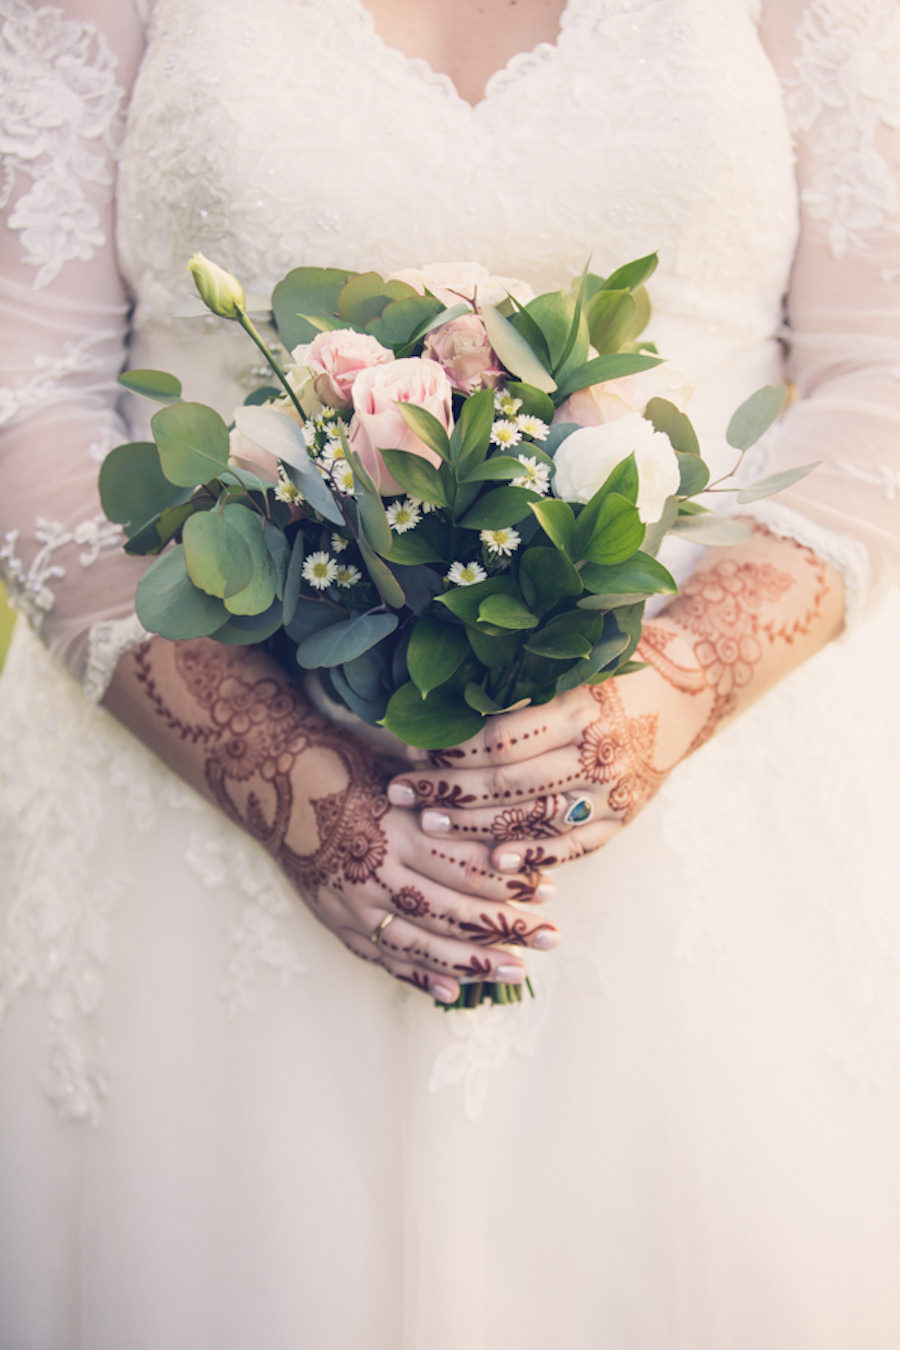 Bridal Portrait with Indian Henna and Long Sleeve Illusion, V-Neck Lace and Rhinestone Floral Accent Wedding Dress with Blush Pink and White Rose and Greenery Floral Bouquet | Tampa Bay Wedding Photographer Luxe Light Photography